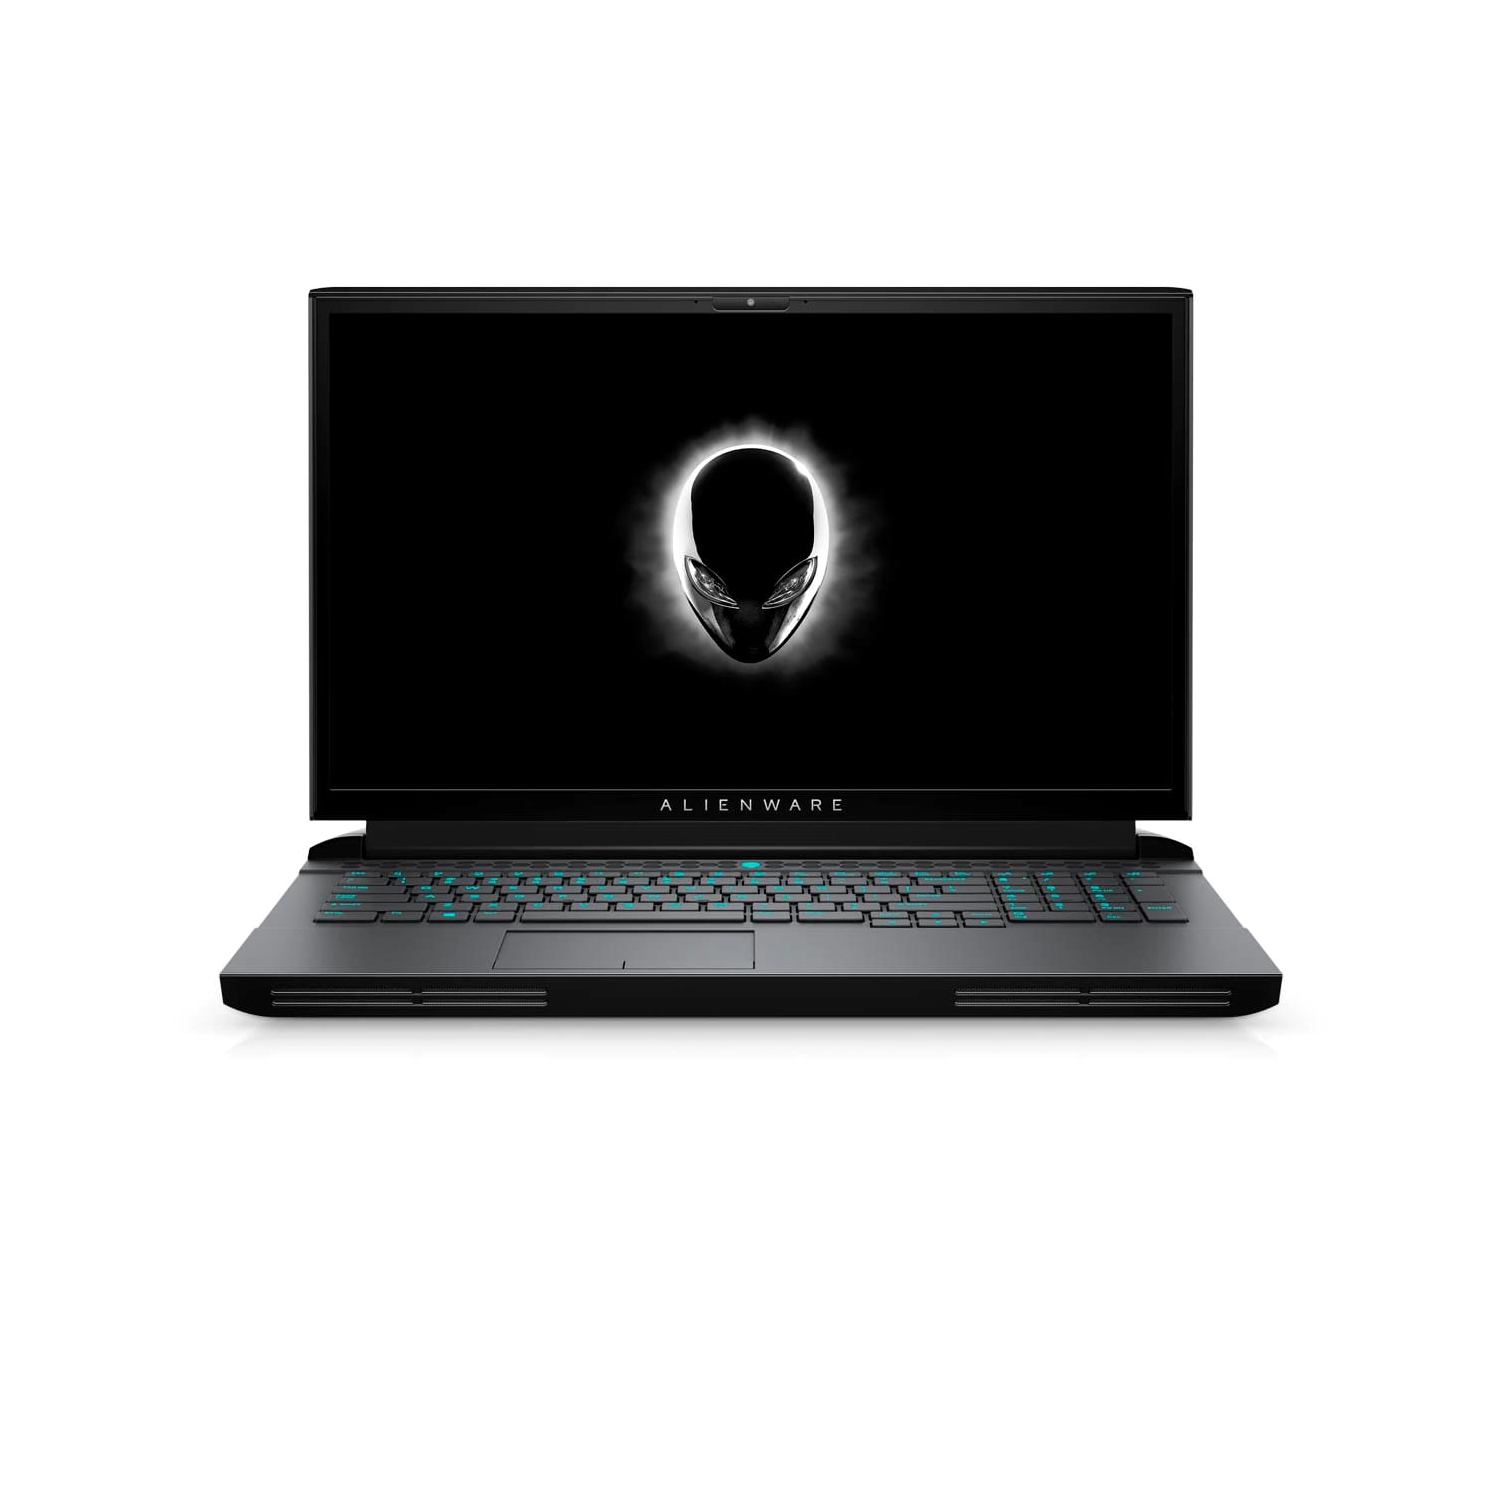 Refurbished (Excellent) - Dell Alienware 17 51m R2 Gaming Laptop (2020), 17.3" FHD, Core i7, 2TB SSD, 32GB RAM, 2070 Super, 8 Cores @ 4.8 GHz, 10th Gen CPU Certified